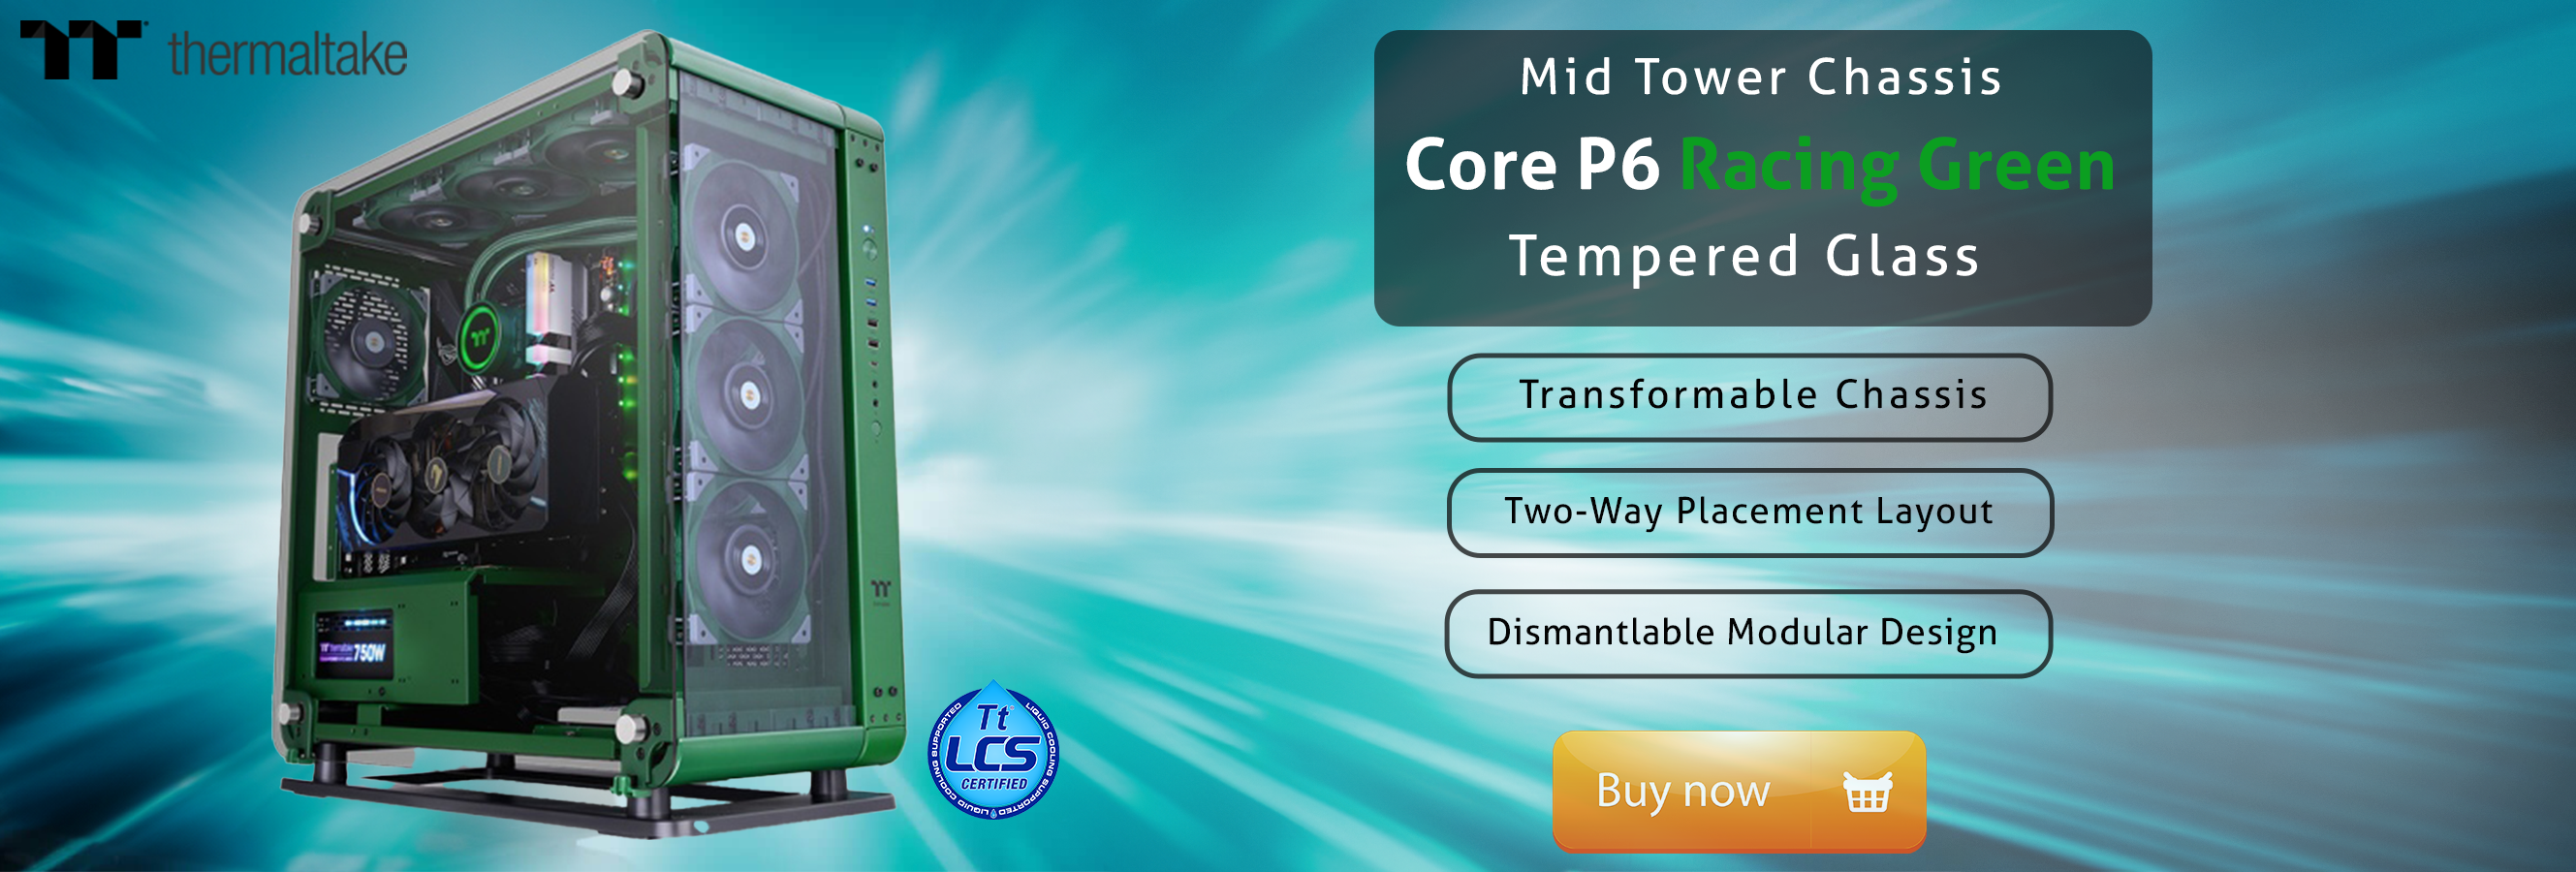 Thermaltake Core P6 Tempered Glass Racing Green Mid Tower Chassis (CA-1V2-00MCWN-00)